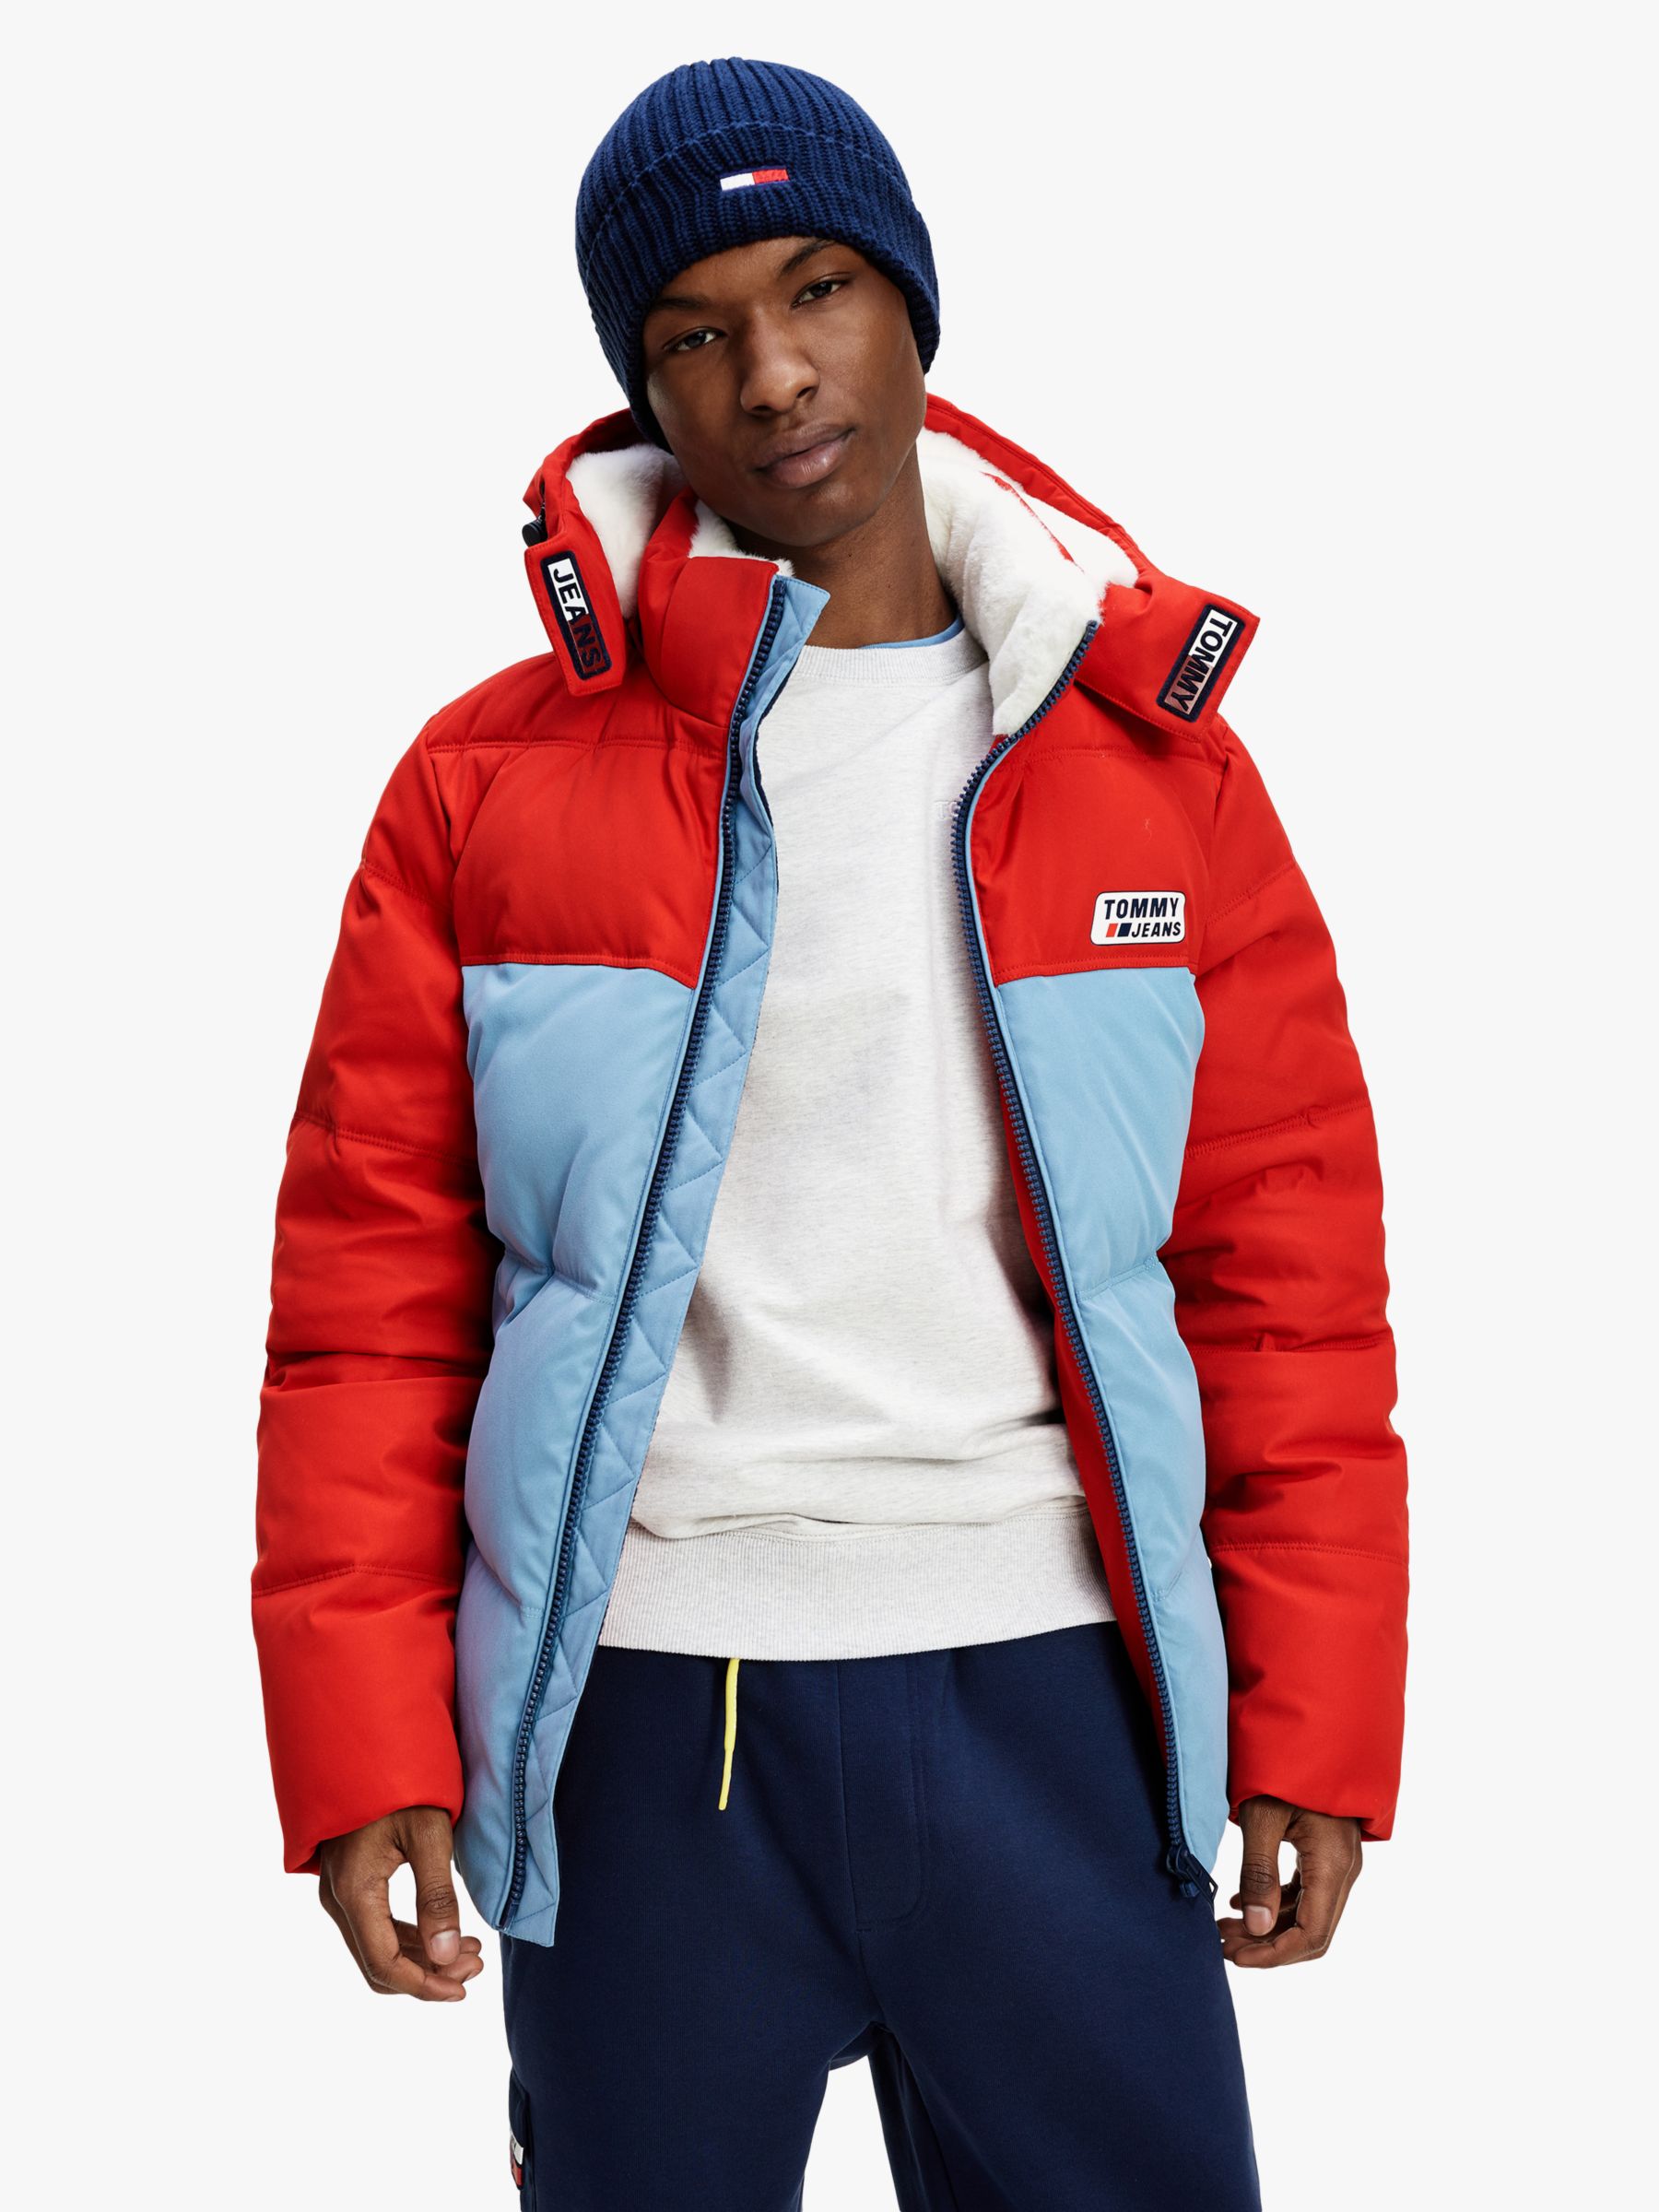 tommy jeans jacket red